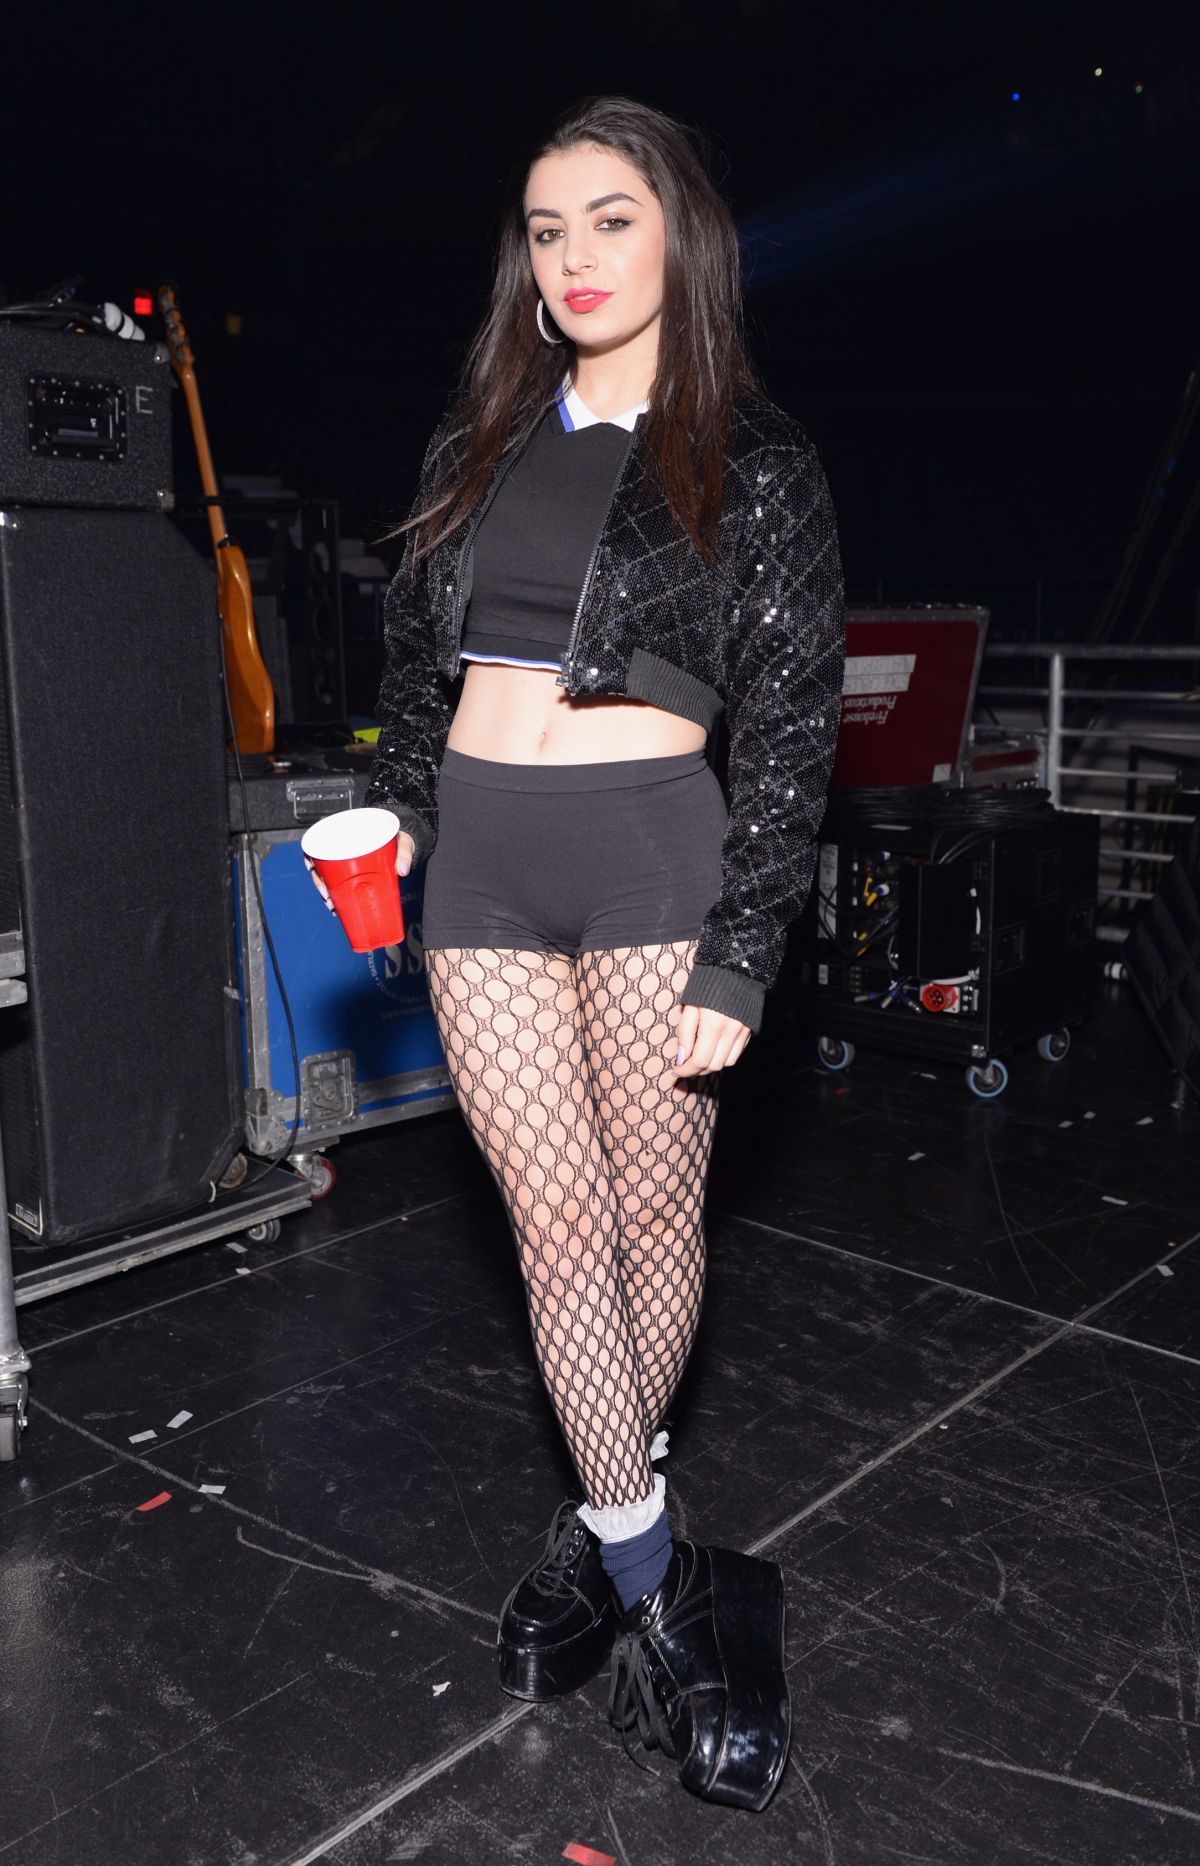 CHARLI XCX at 103.5 Kiss FM Jingle Ball in Chicago.